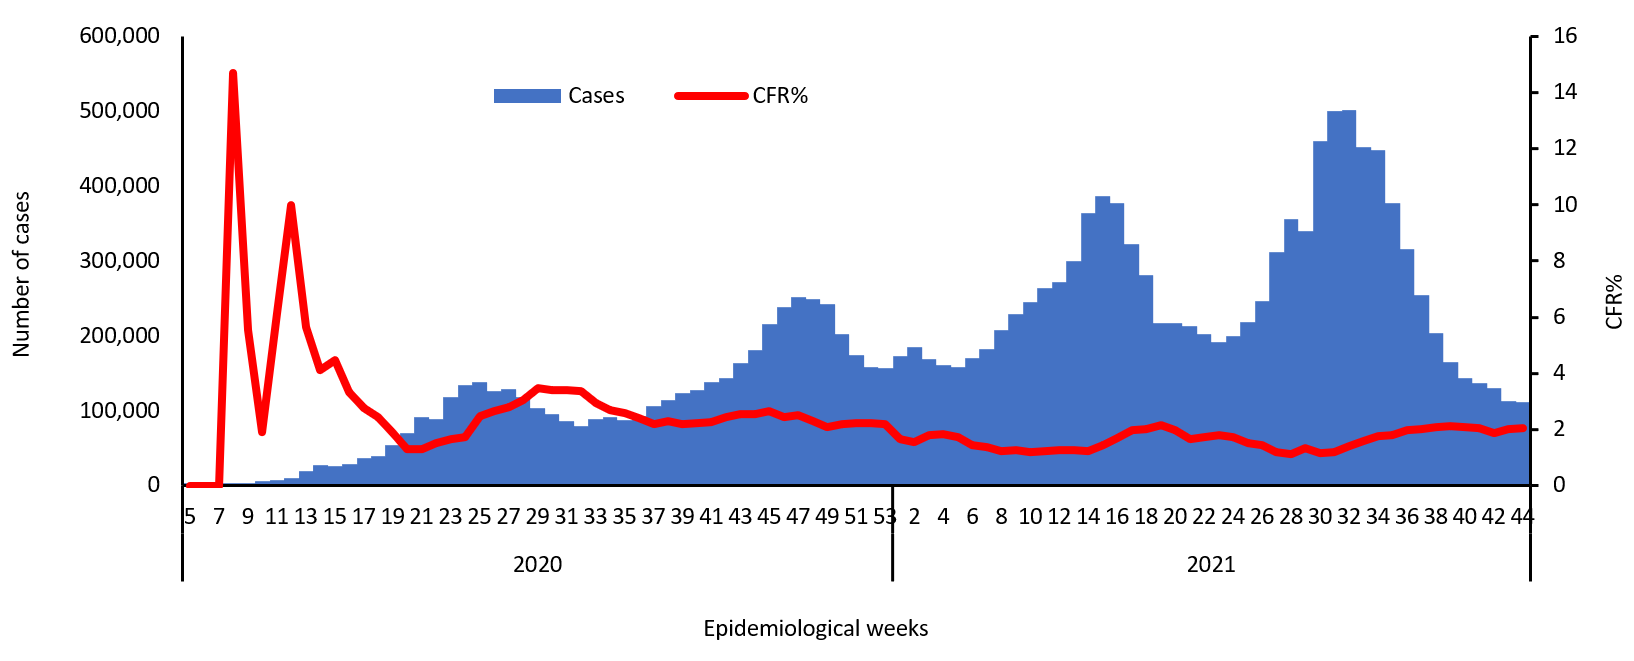 COVID-19 epidemiological weeks for cases